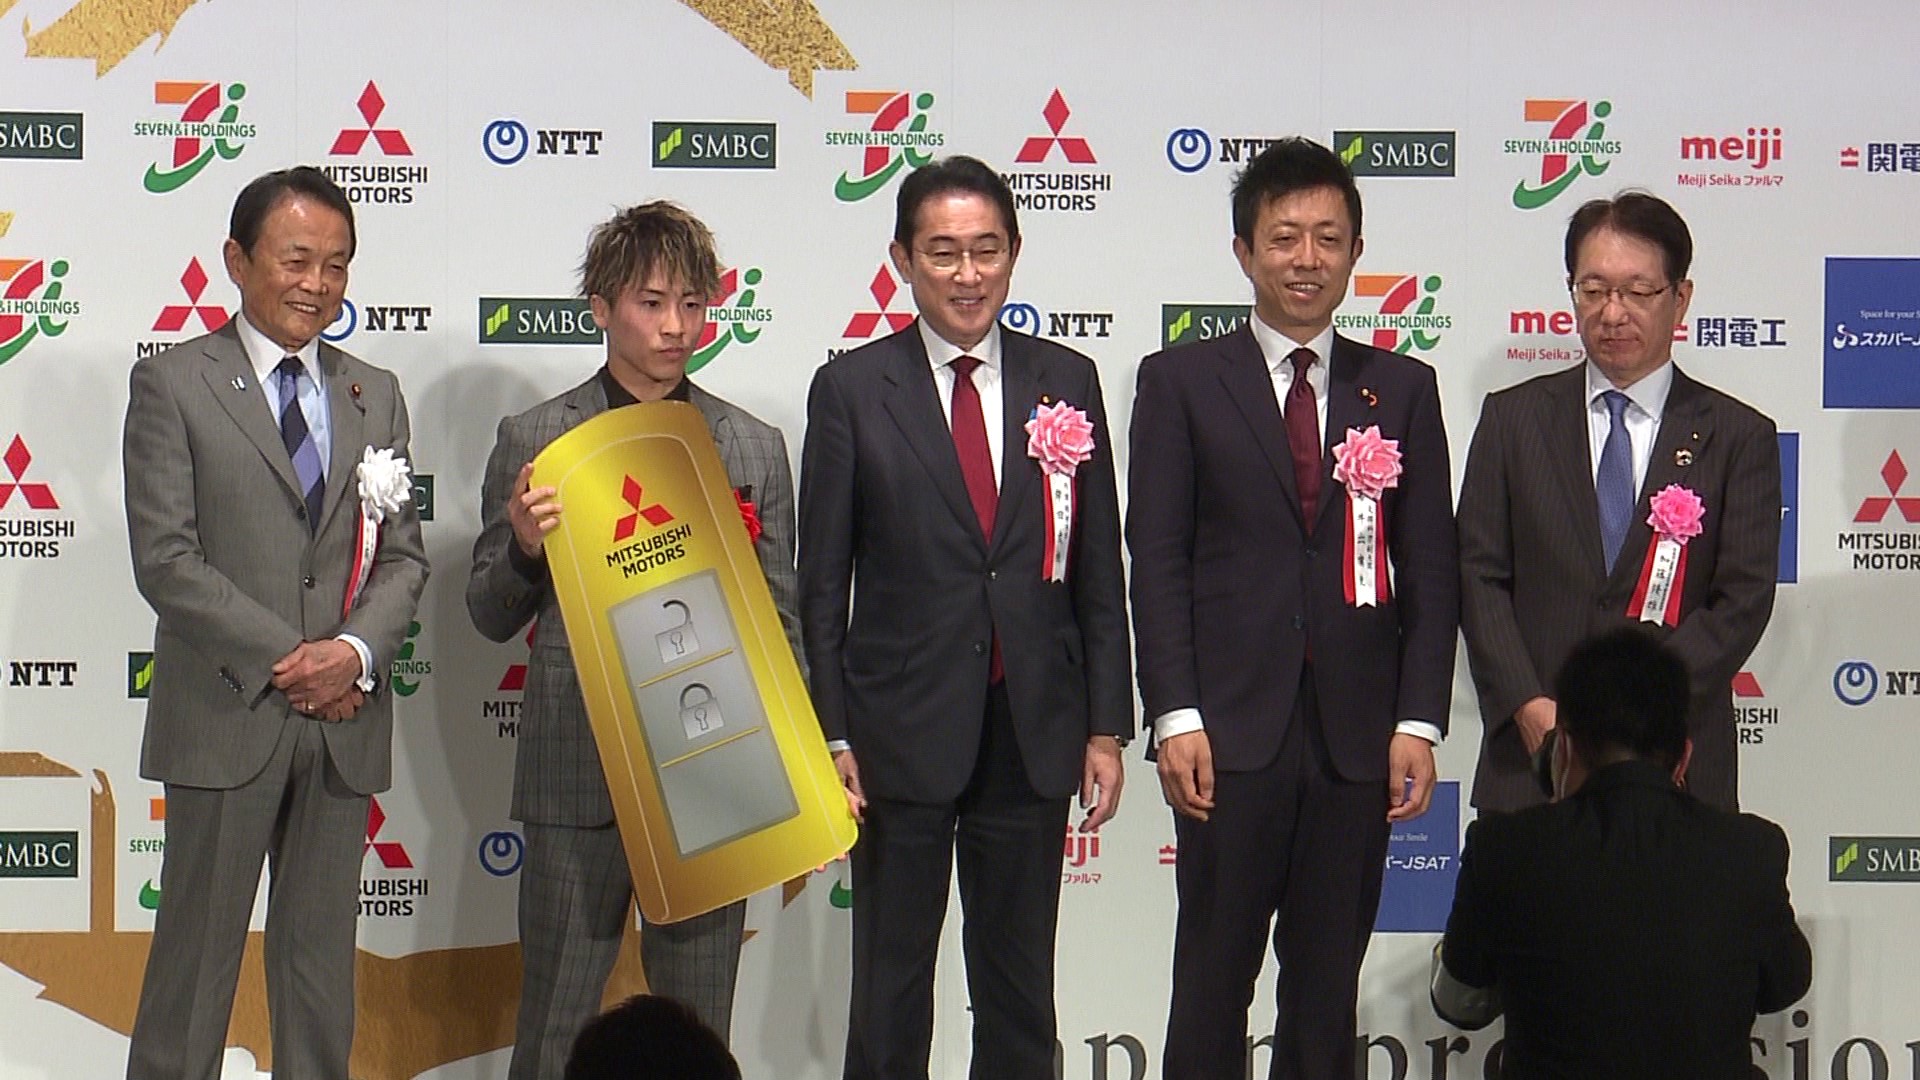 Commemorative photo session with the award winner and other members